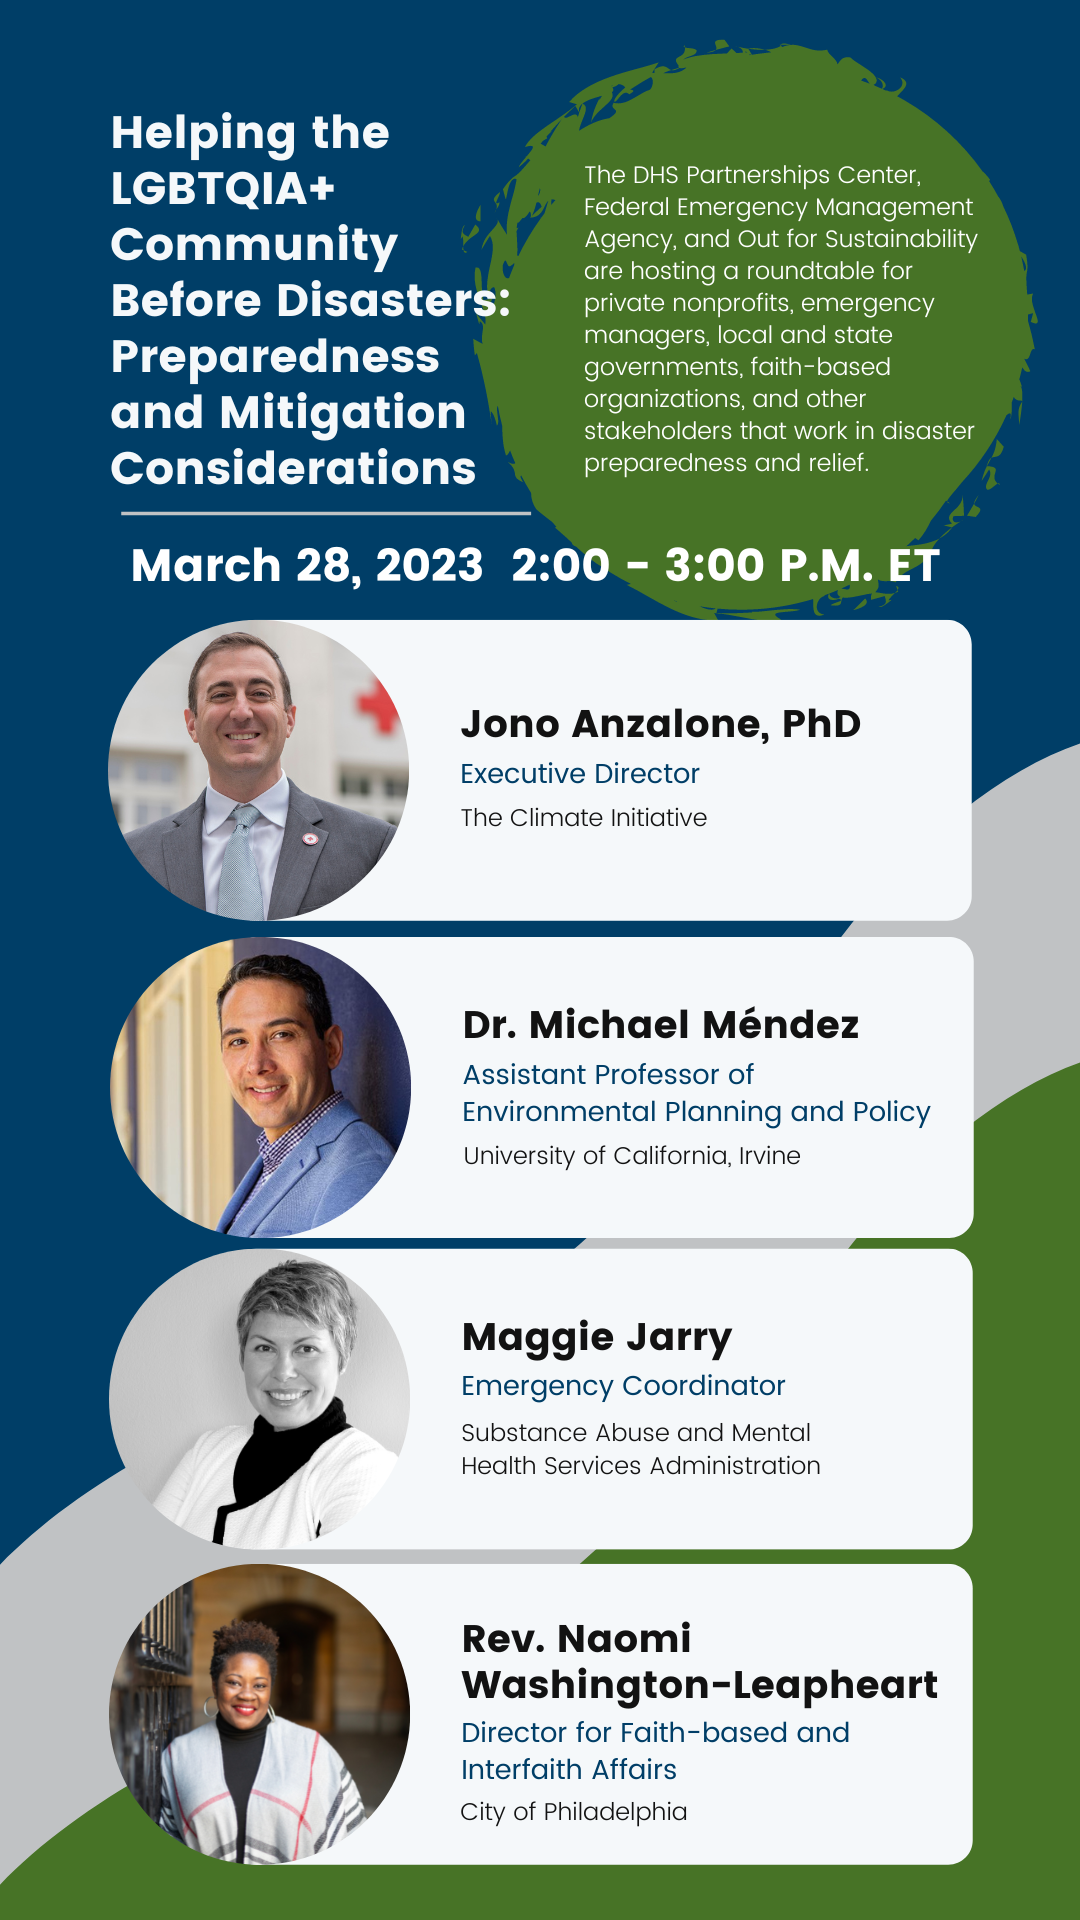 Helping the LGBTQIA+ Community Before Disasters: Preparedness and Mitigation Considerations; March 28, 2023  2:00 - 3:00 P.M. EST; Images of Panelists including Jono Anzalone, PhD, Dr. Michael Méndez, Maggie Jarry, Rev. Naomi Washington-Leapheart